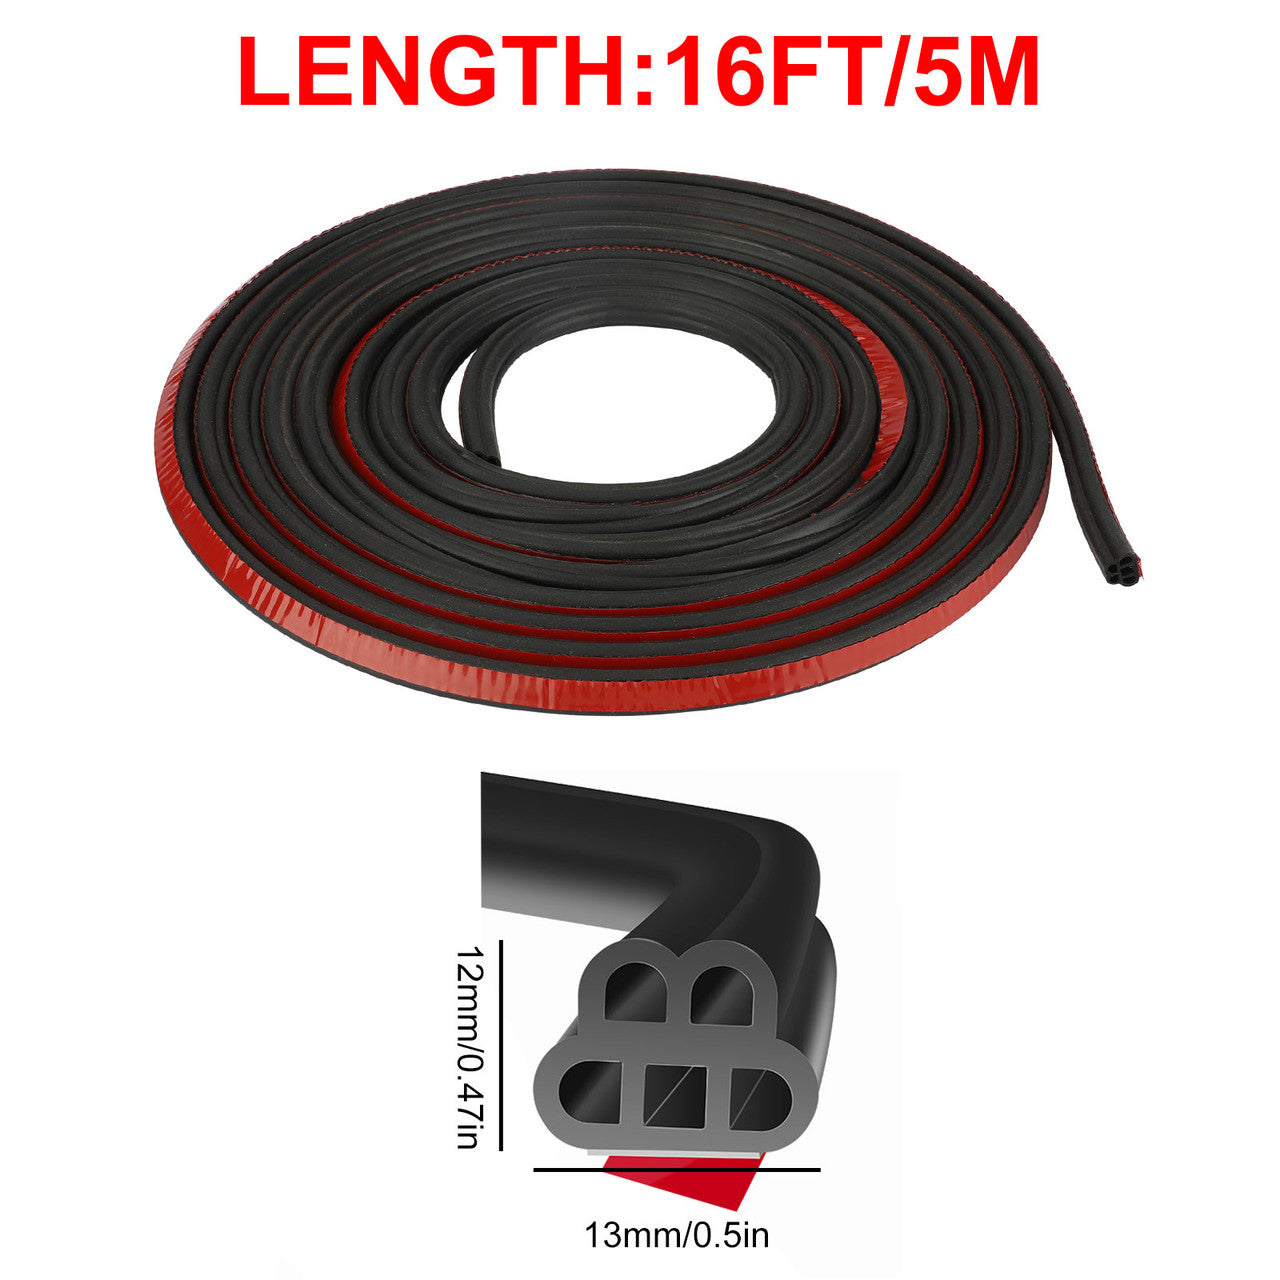 16Ft Double Layer Car Door Seal Strip, Universal Auto Windshield Seal Strip, Car L Shape Rubber Edge Weatherstrip for Door Sunroofs Engine Cover, Soundproofing Waterproof Weather Stripping